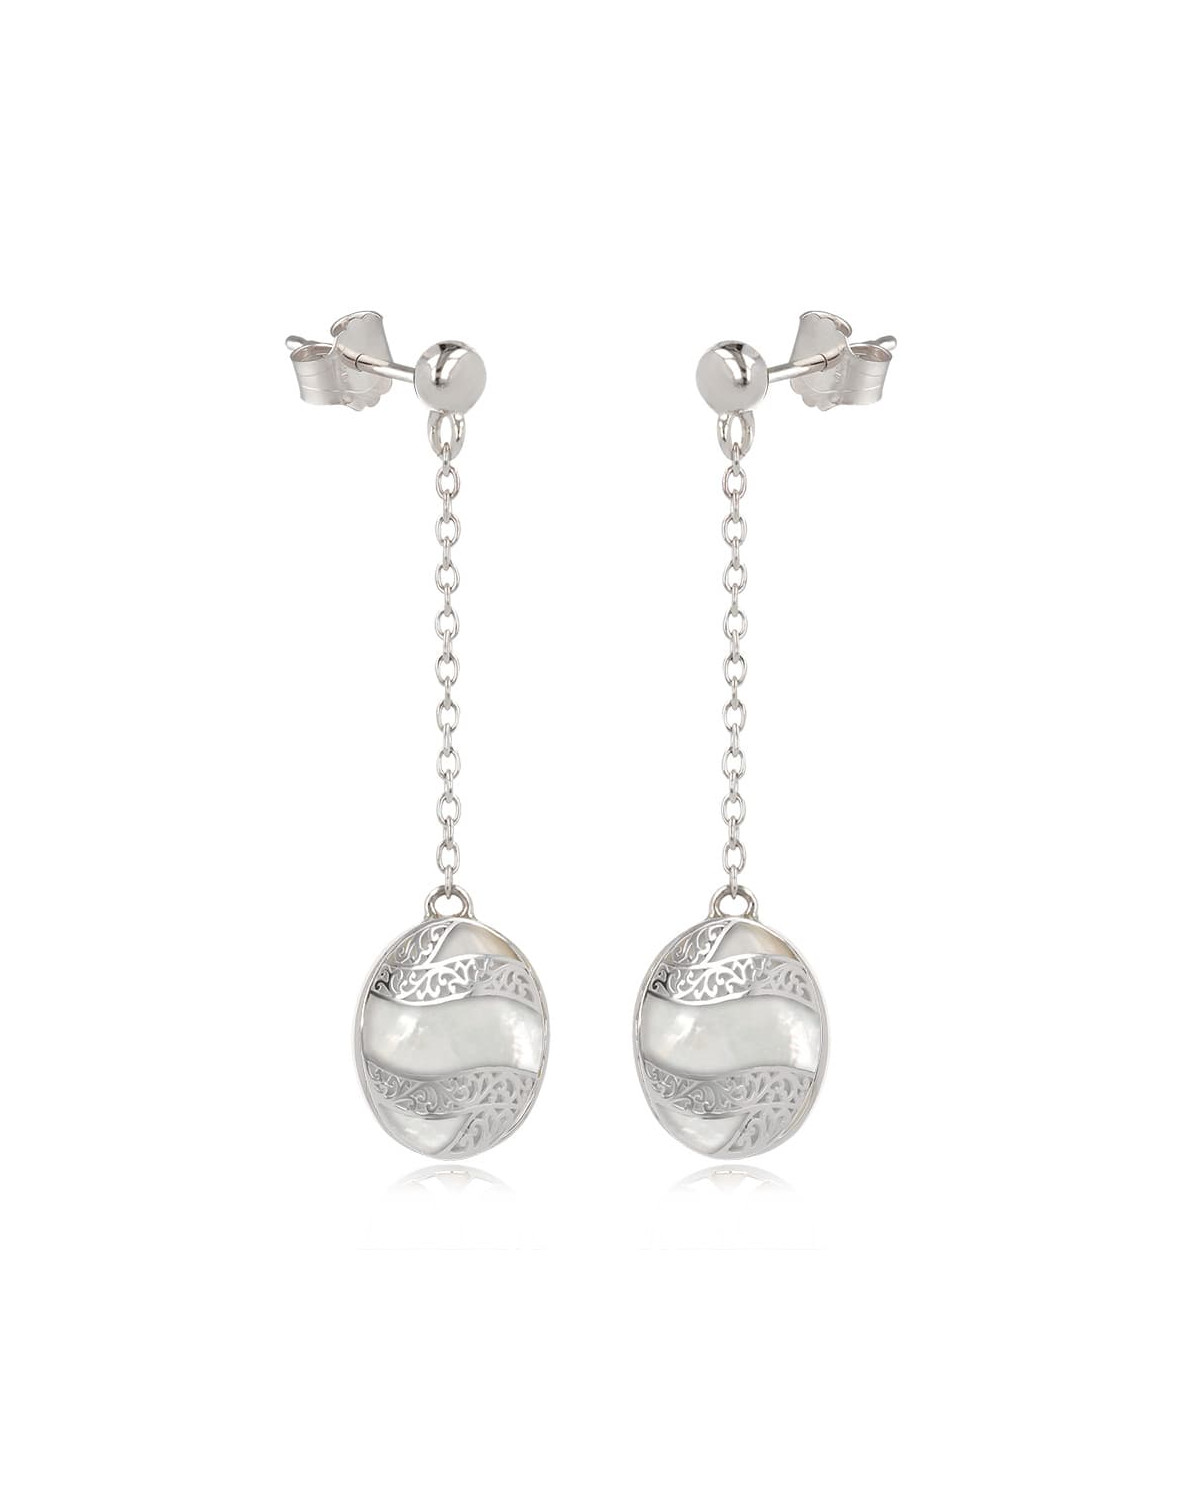 925 Sterling Silver White Mother-of-pearl Oval Shape Earrings